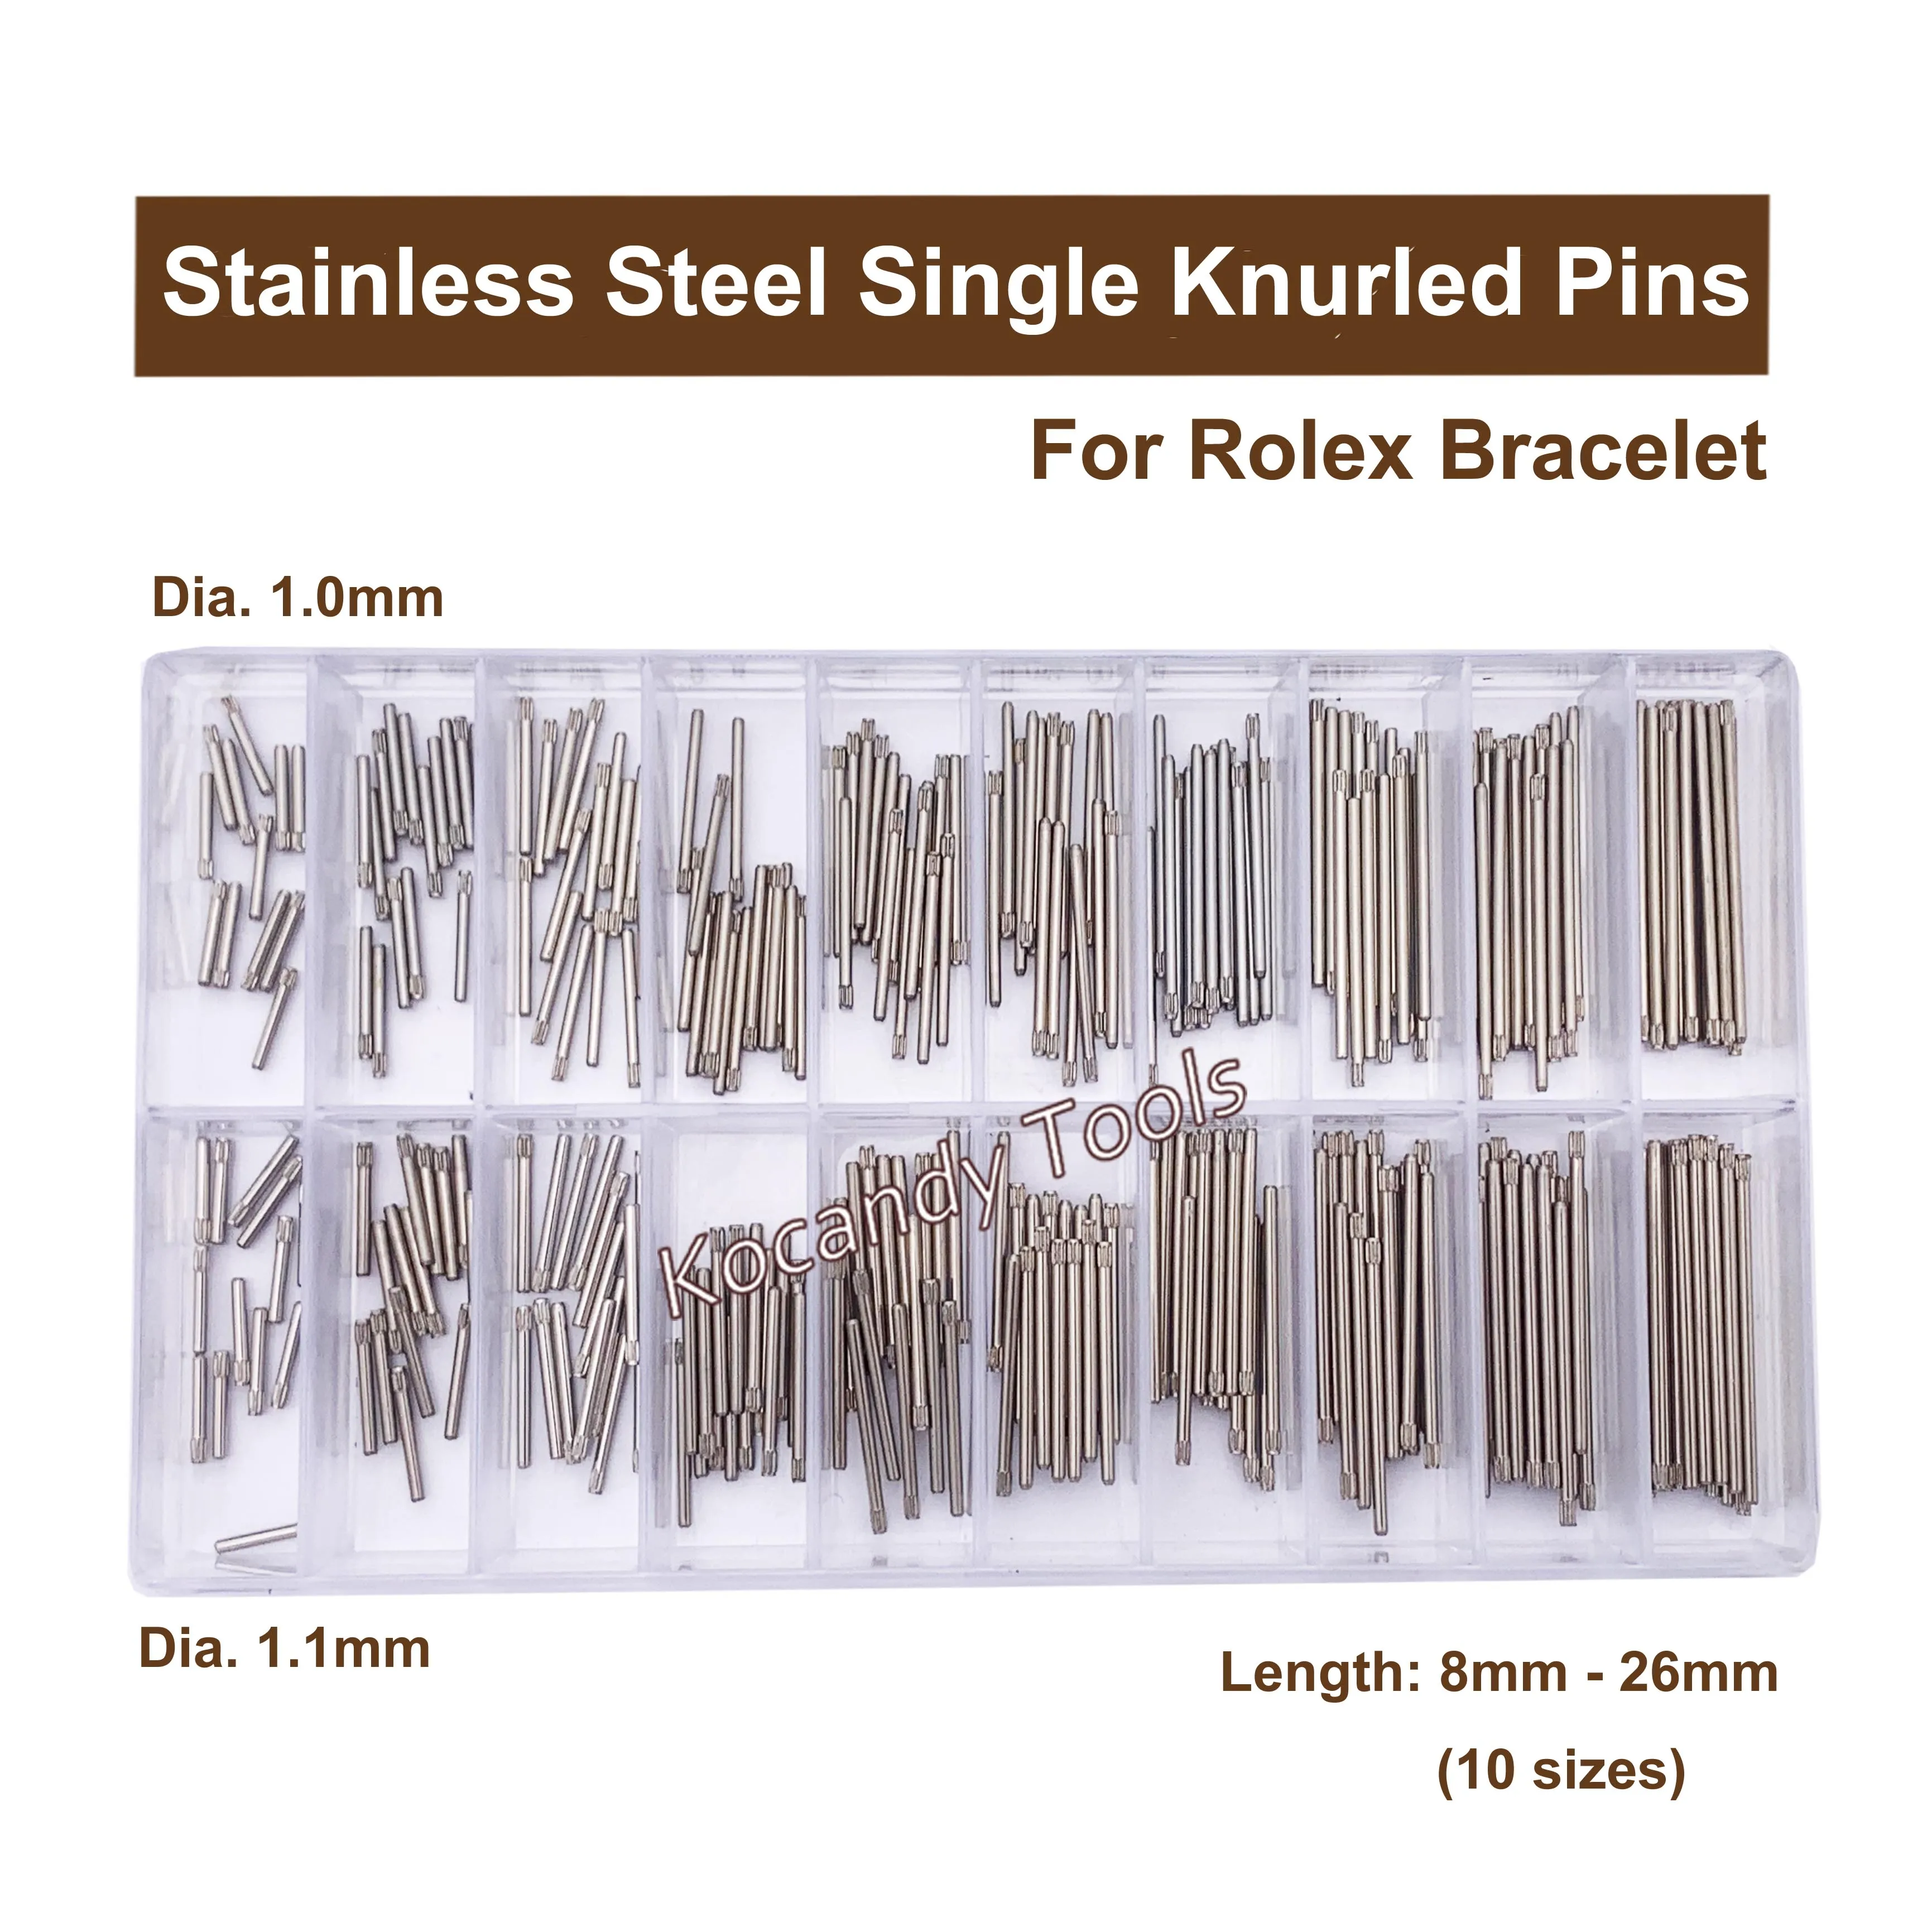 

Total of 300pcs Stainless Steel Single Knurled Pins Replacement for Rolex Bracelet Watch Accessories